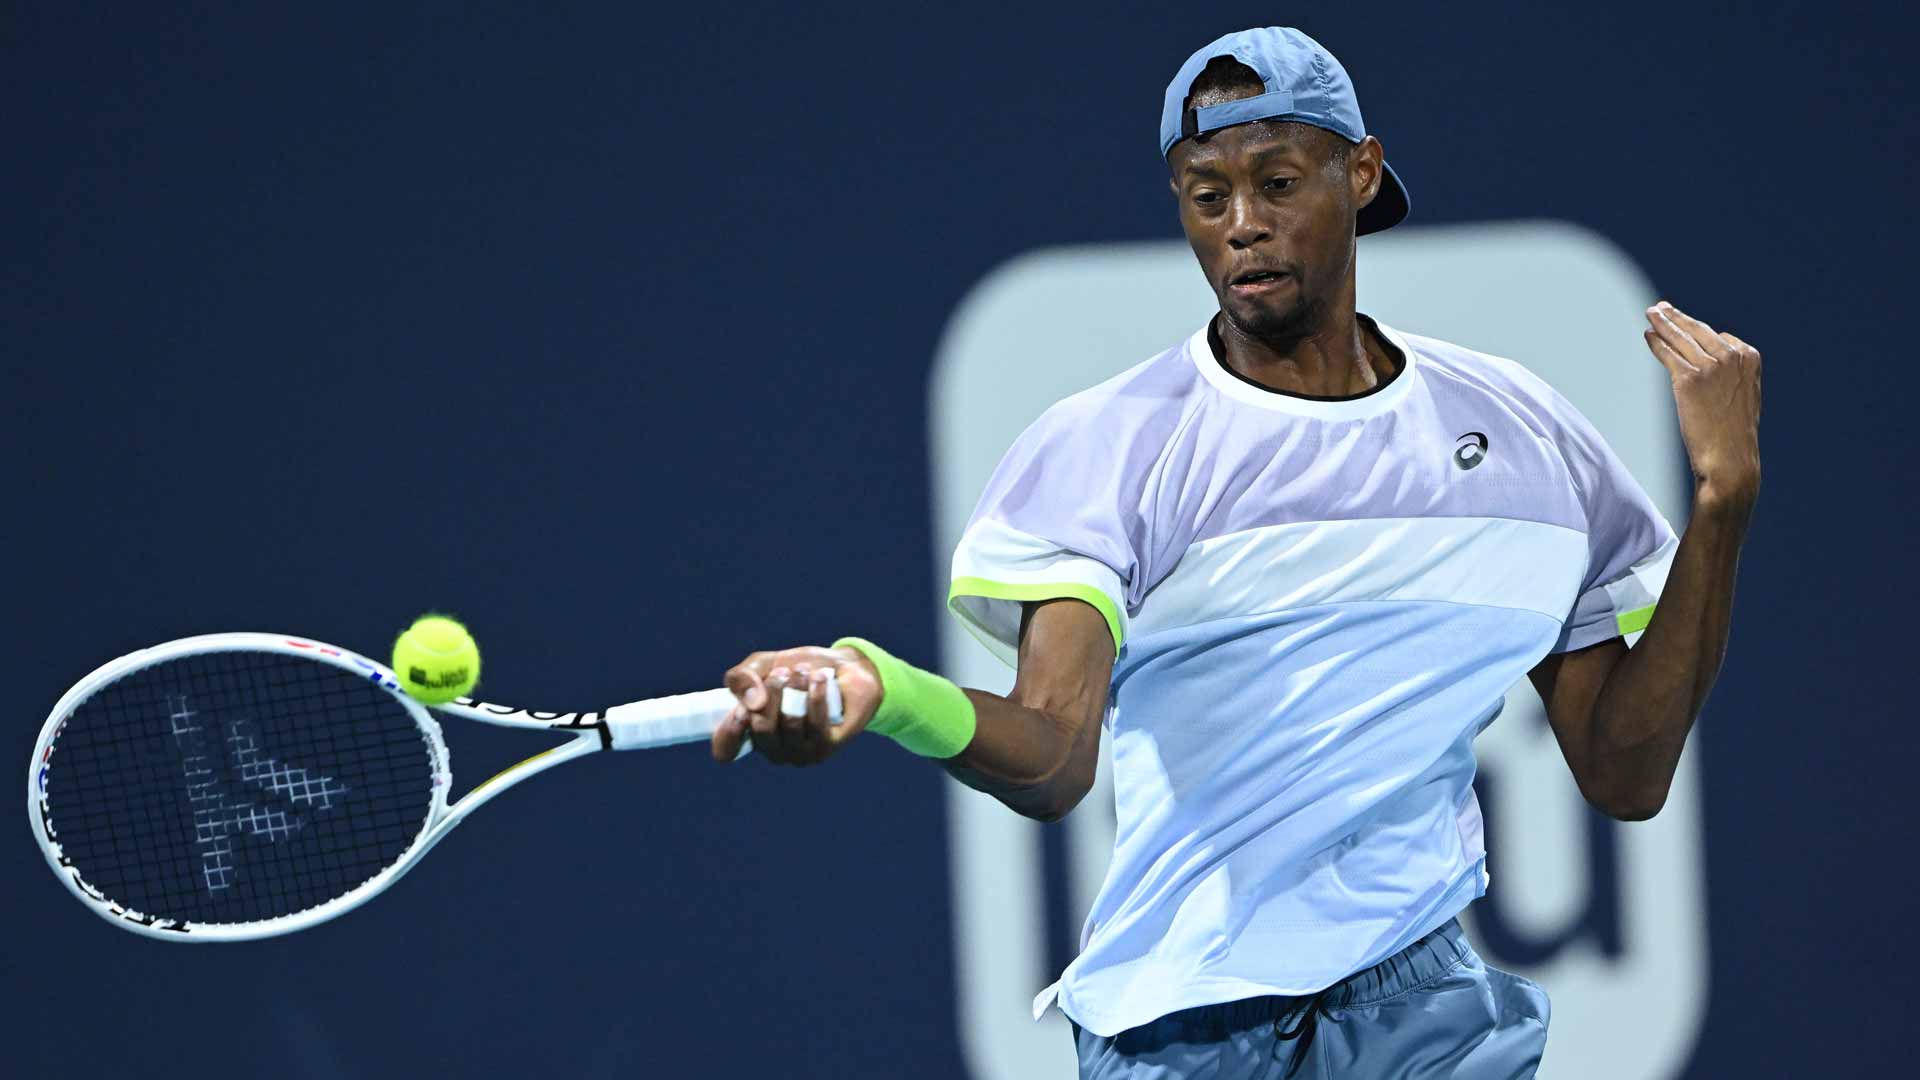 Christopher Eubanks' Dream Miami Run Continues: 'This Feels Great' | ATP Tour | Tennis